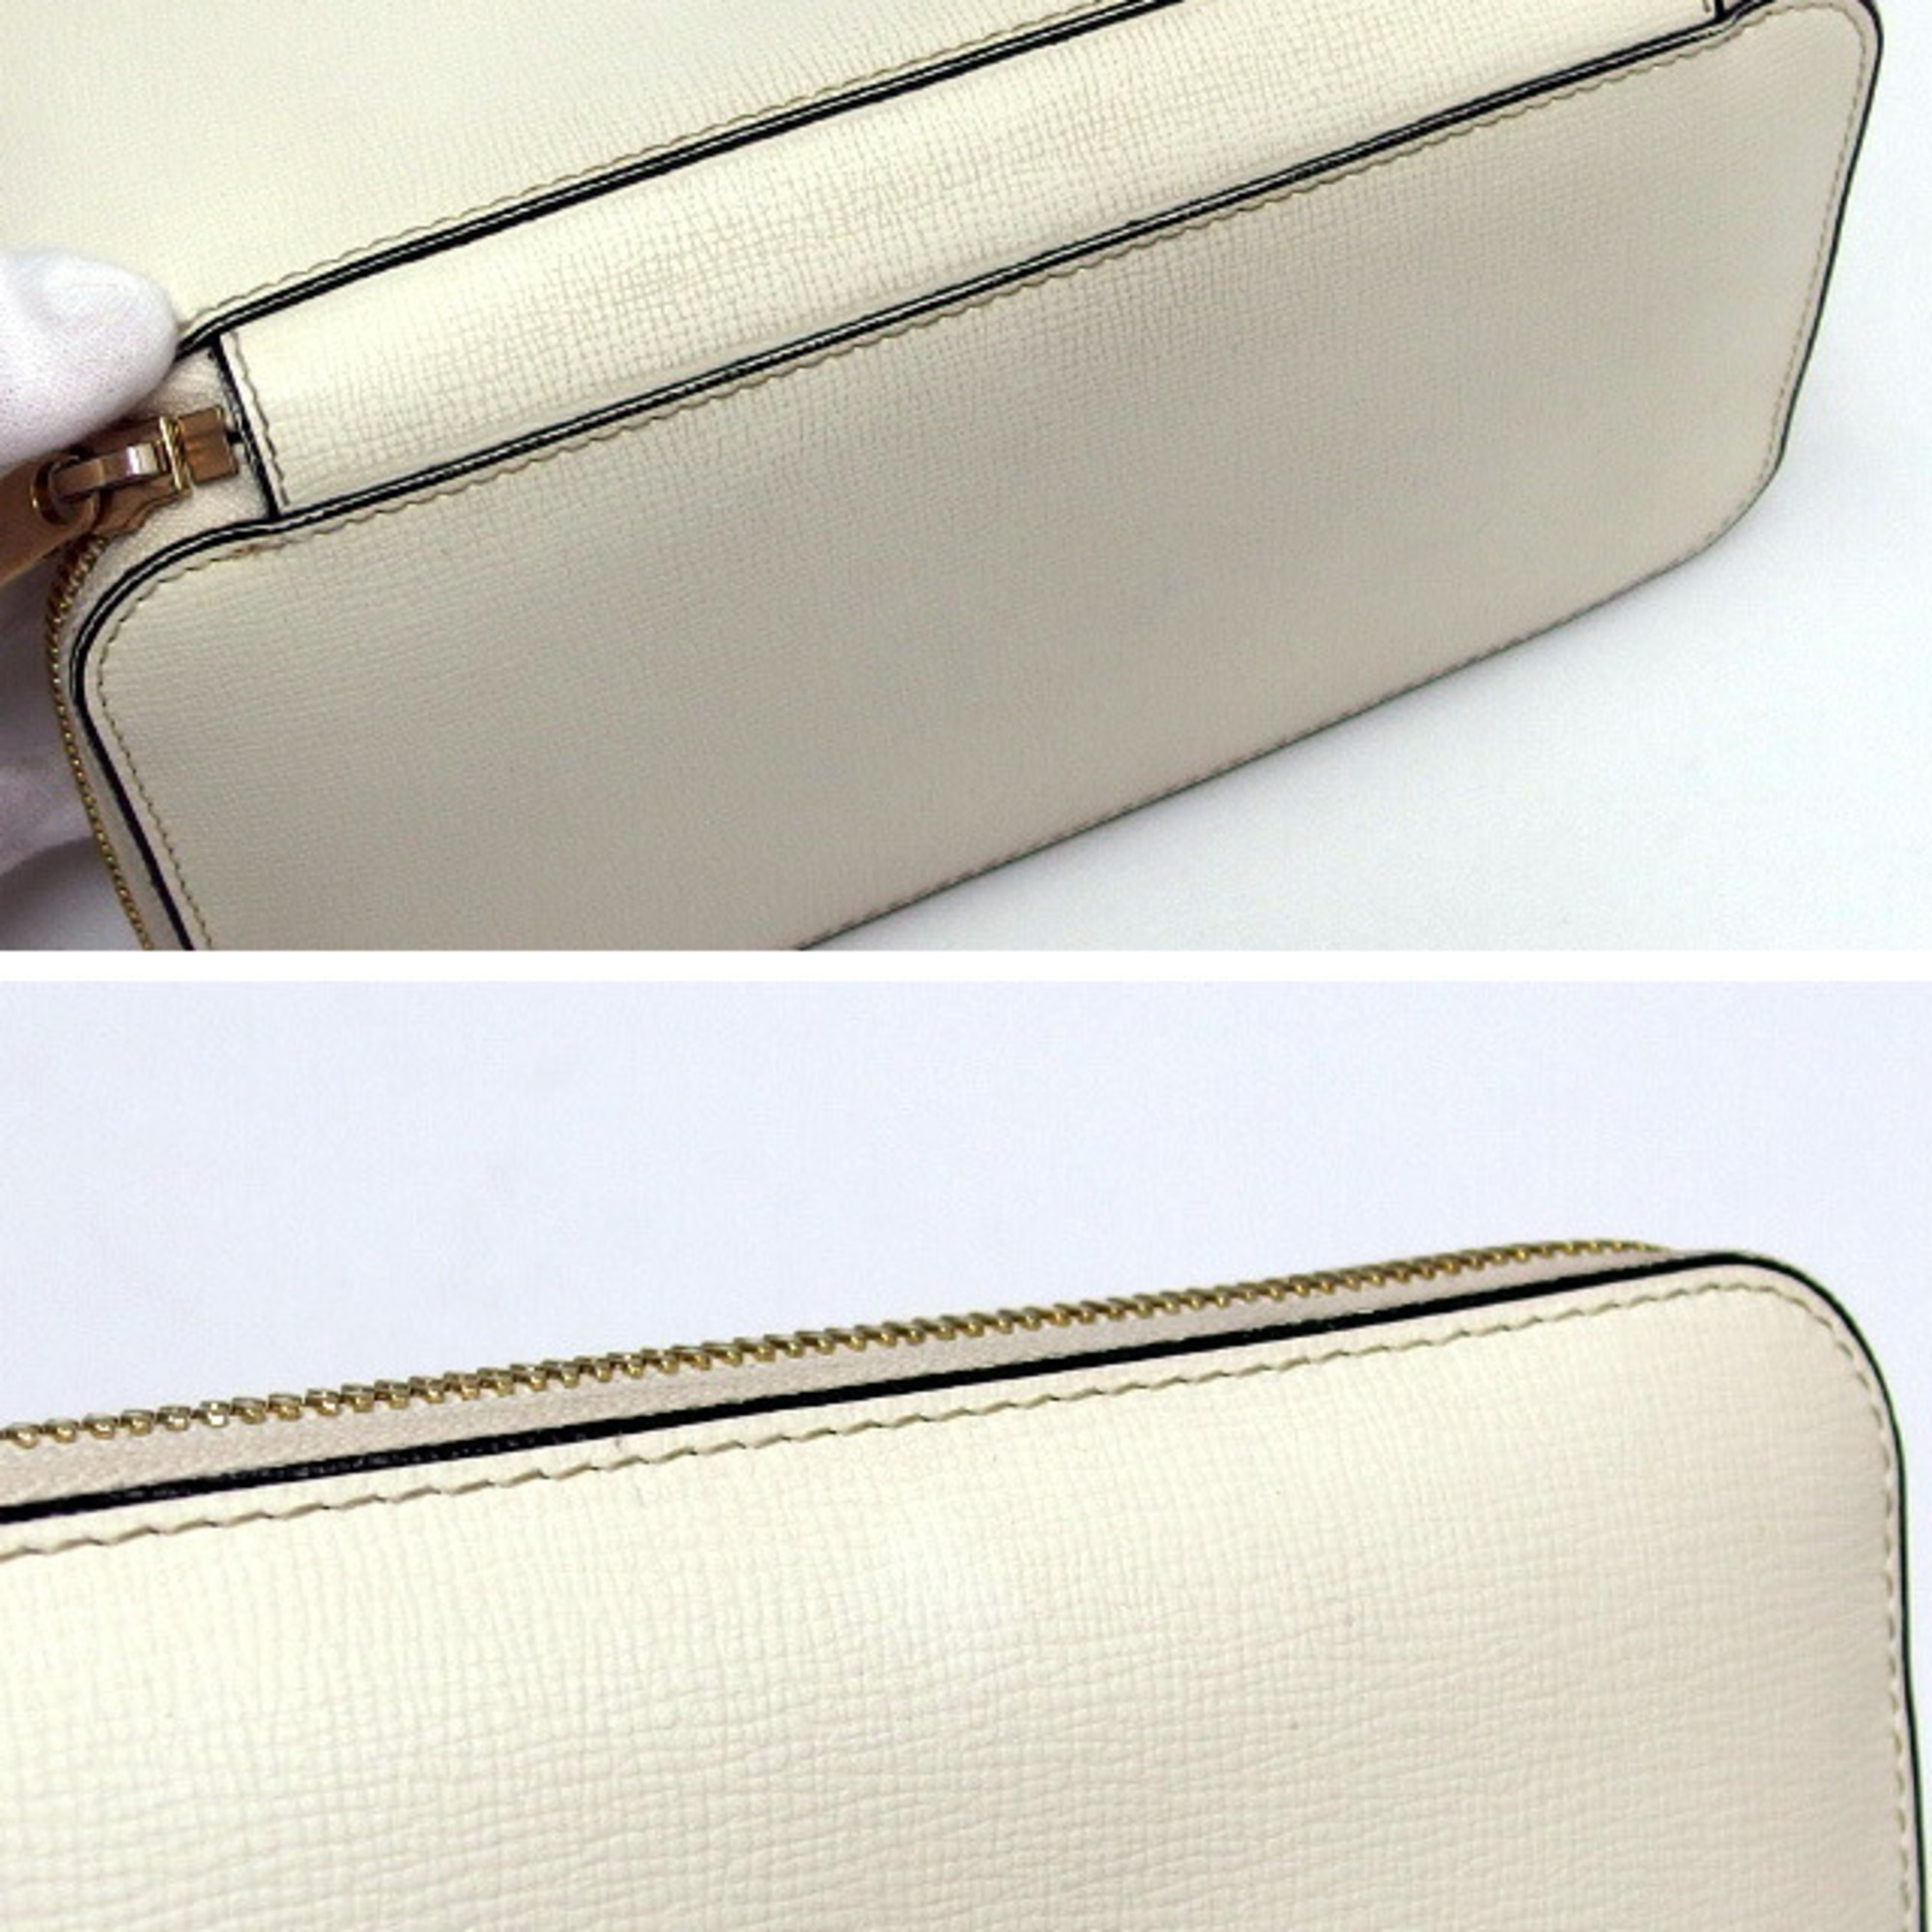 Valextra Round Long Wallet Grain Leather Off White